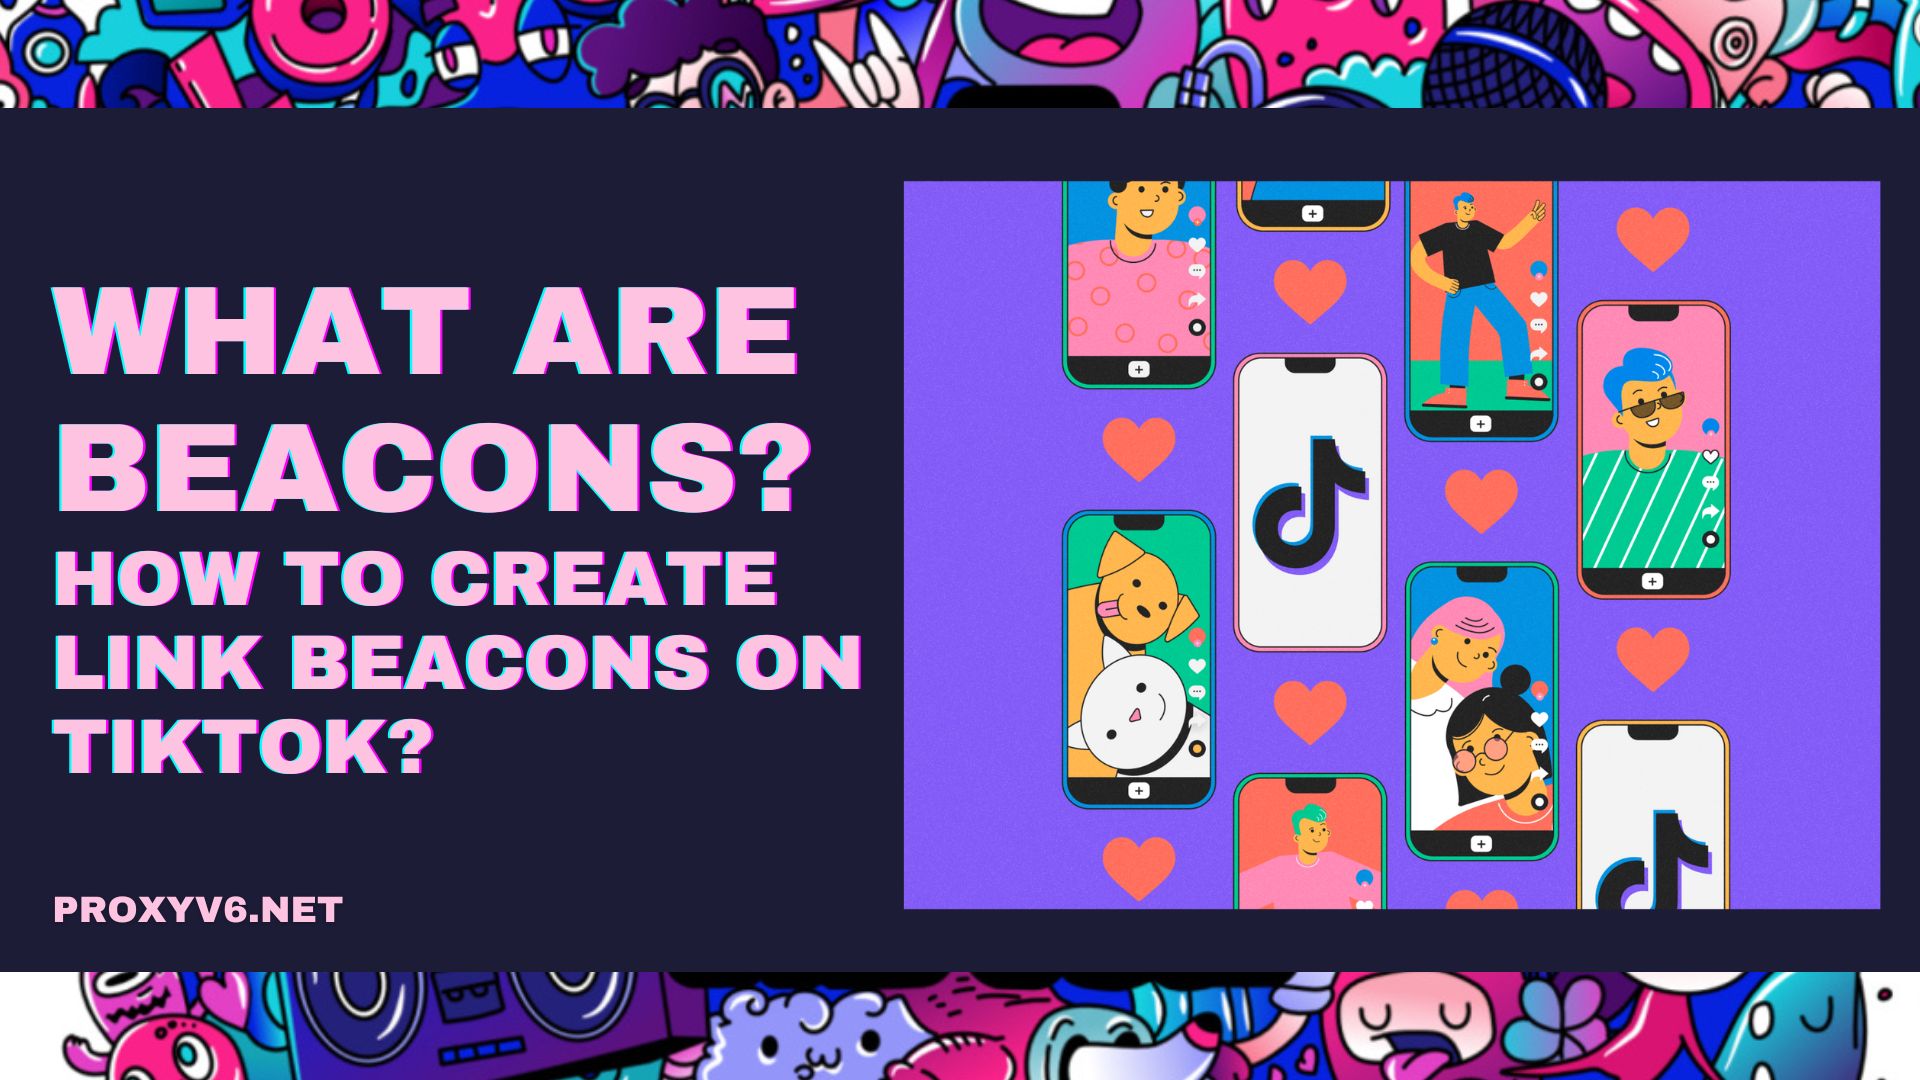 What are Beacons? How to create link beacons on tiktok?